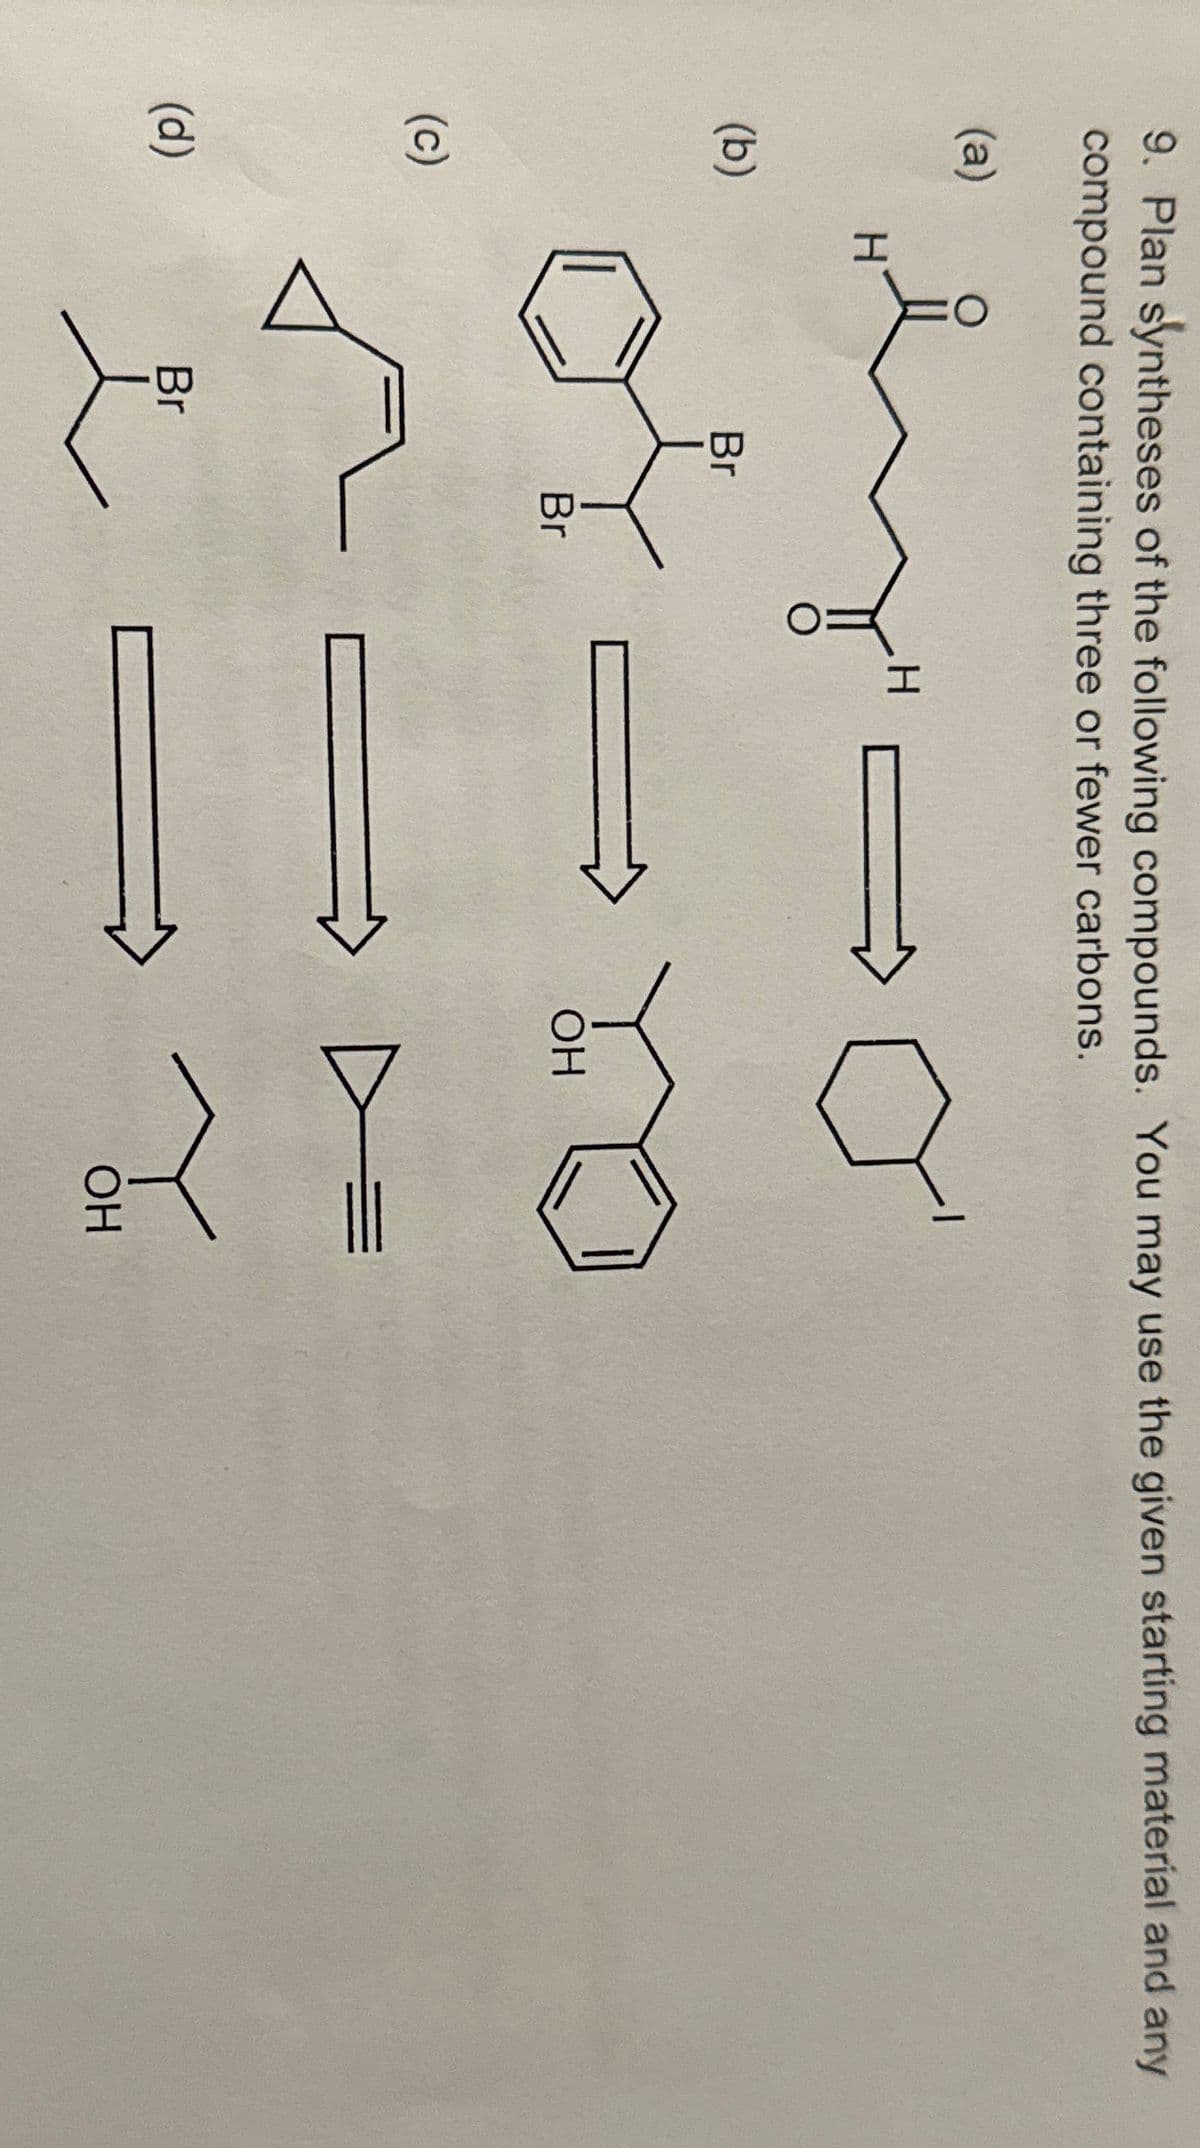 9. Plan syntheses of the following compounds. You may use the given starting material and any
compound containing three or fewer carbons.
(a)
(b)
(c)
(d)
by
Br
or
Br
H
Br
H
OH
=
OH